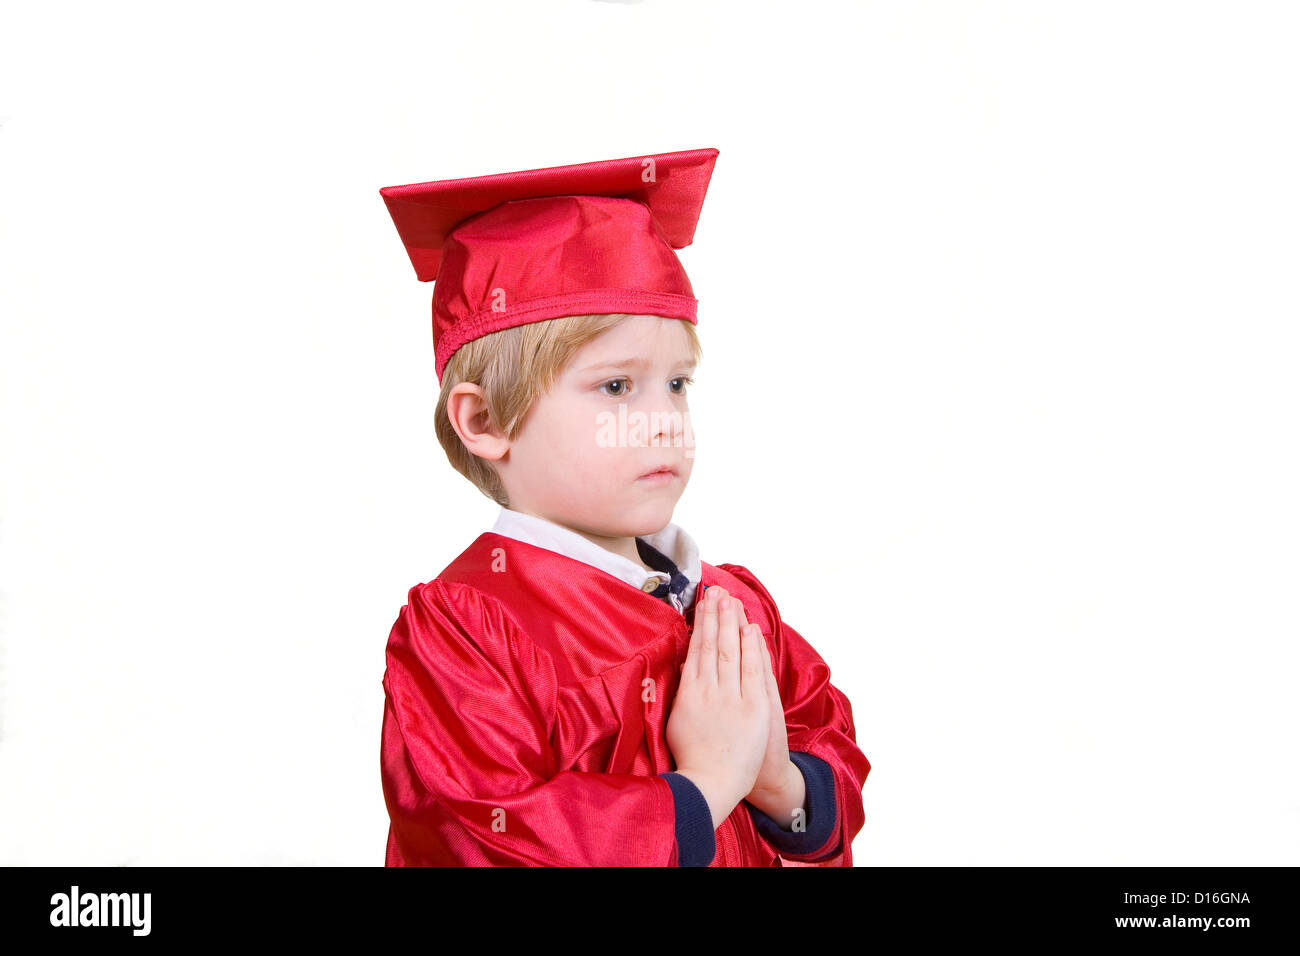 A boy in a red graduation gown with his hands in a prayer pose Stock Photo